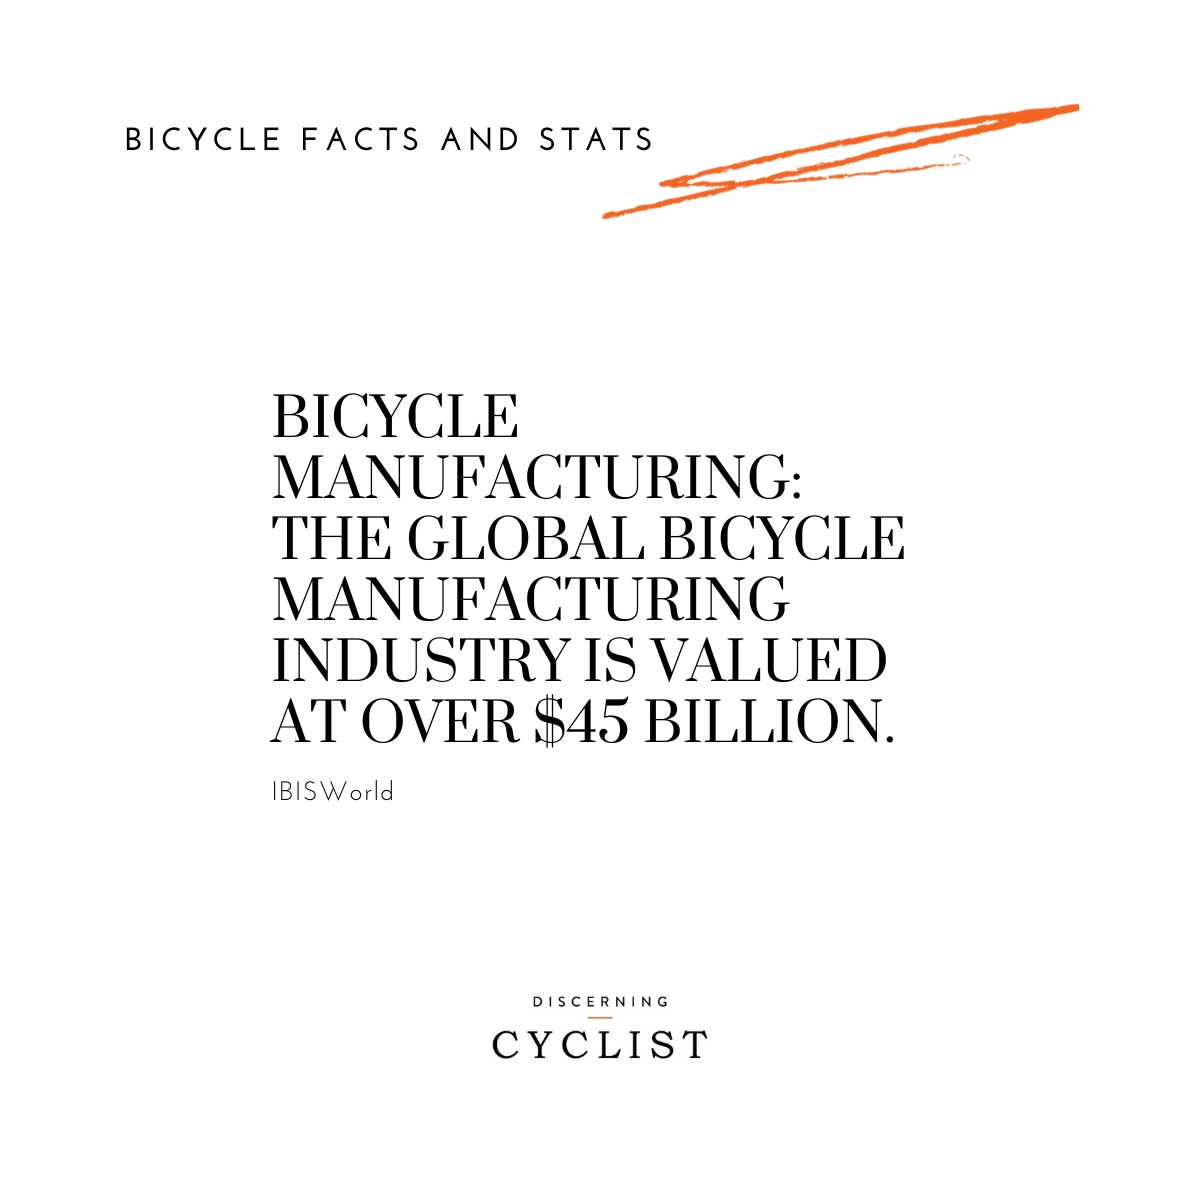 Bicycle Manufacturing: The global bicycle manufacturing industry is valued at over $45 billion.